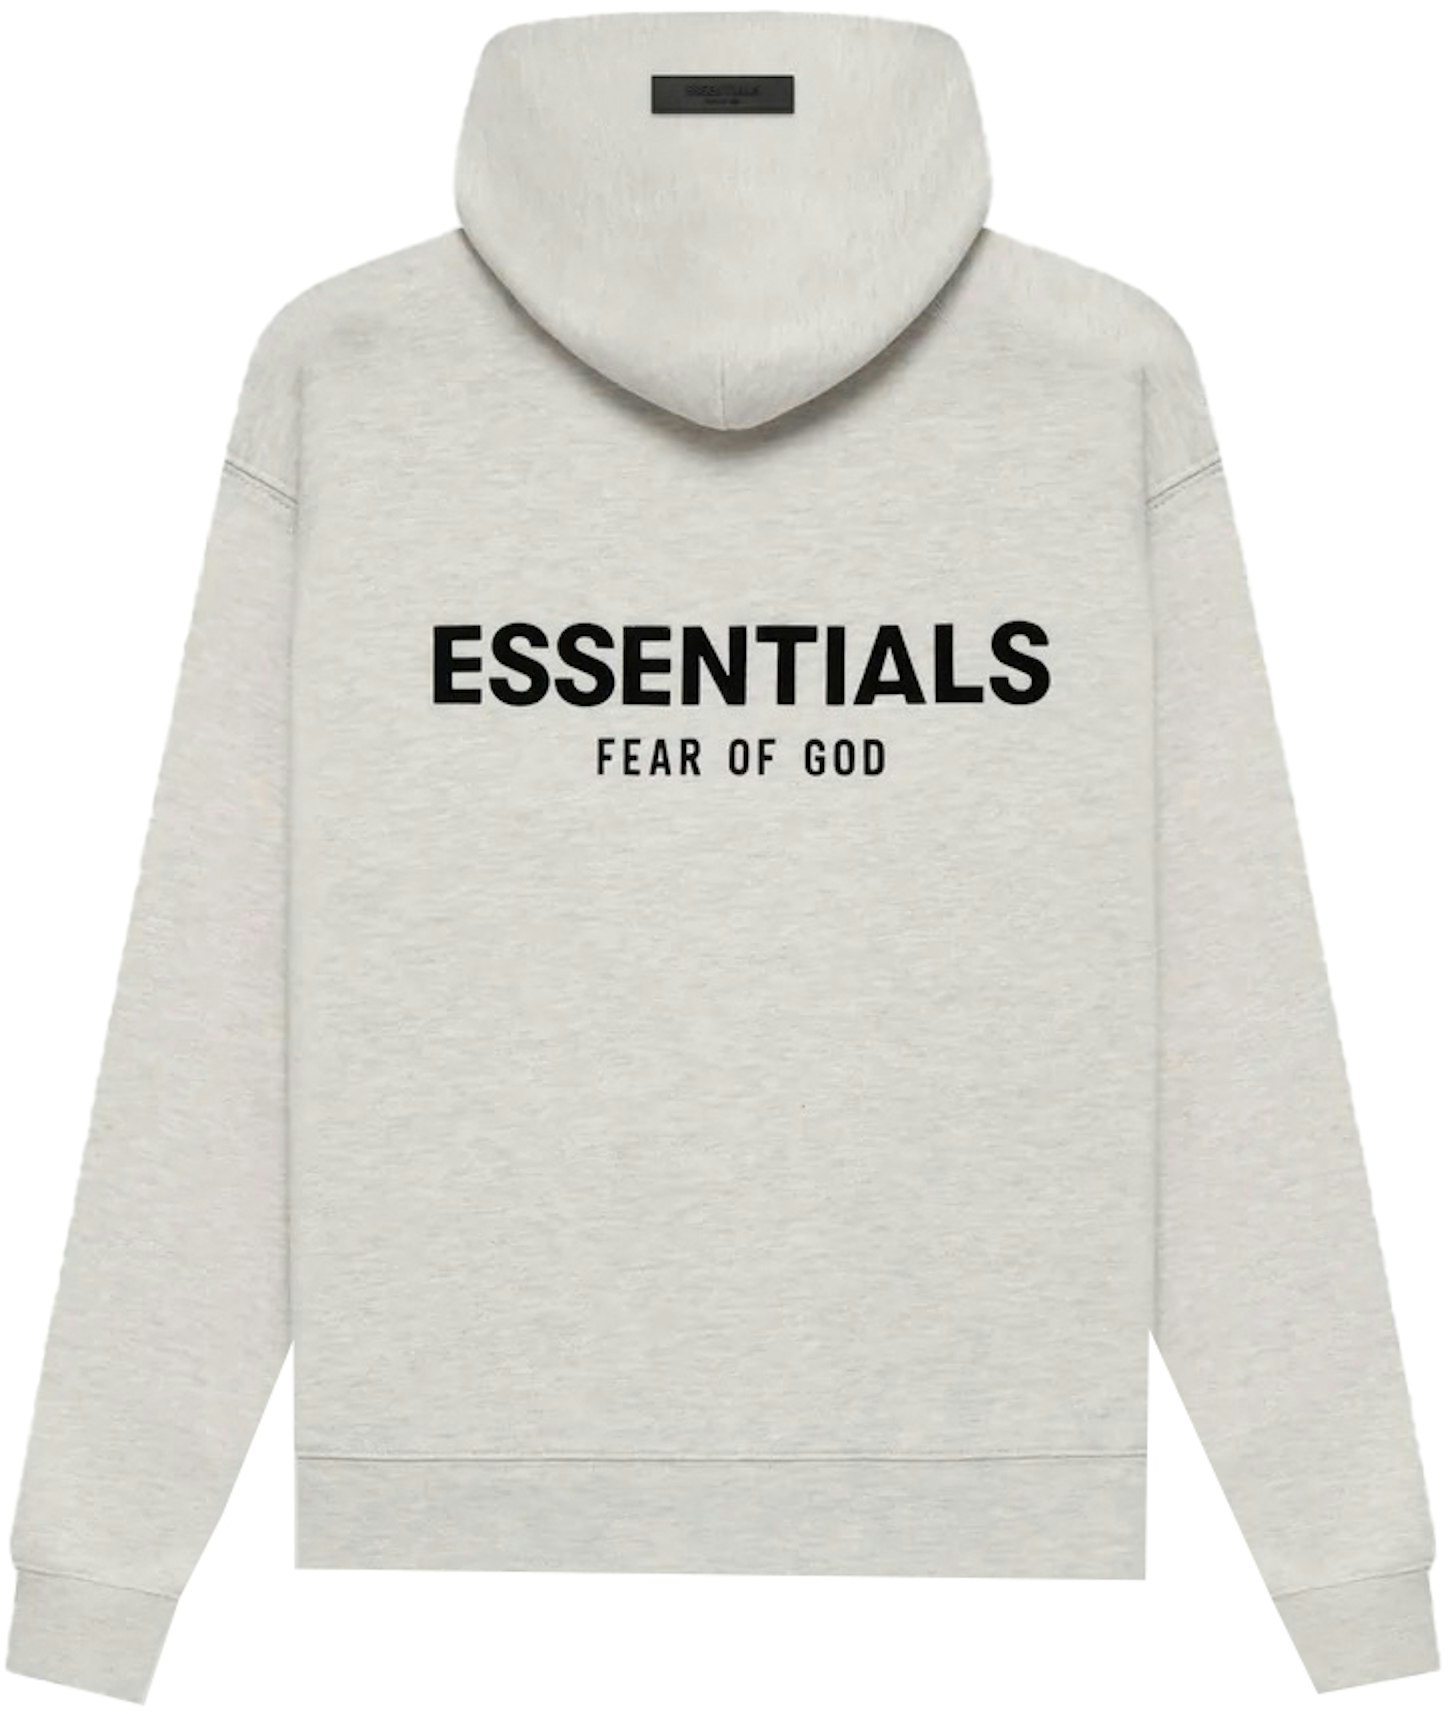 Wear Essentials Hoodie For Your Comfort - Lacida Shopping